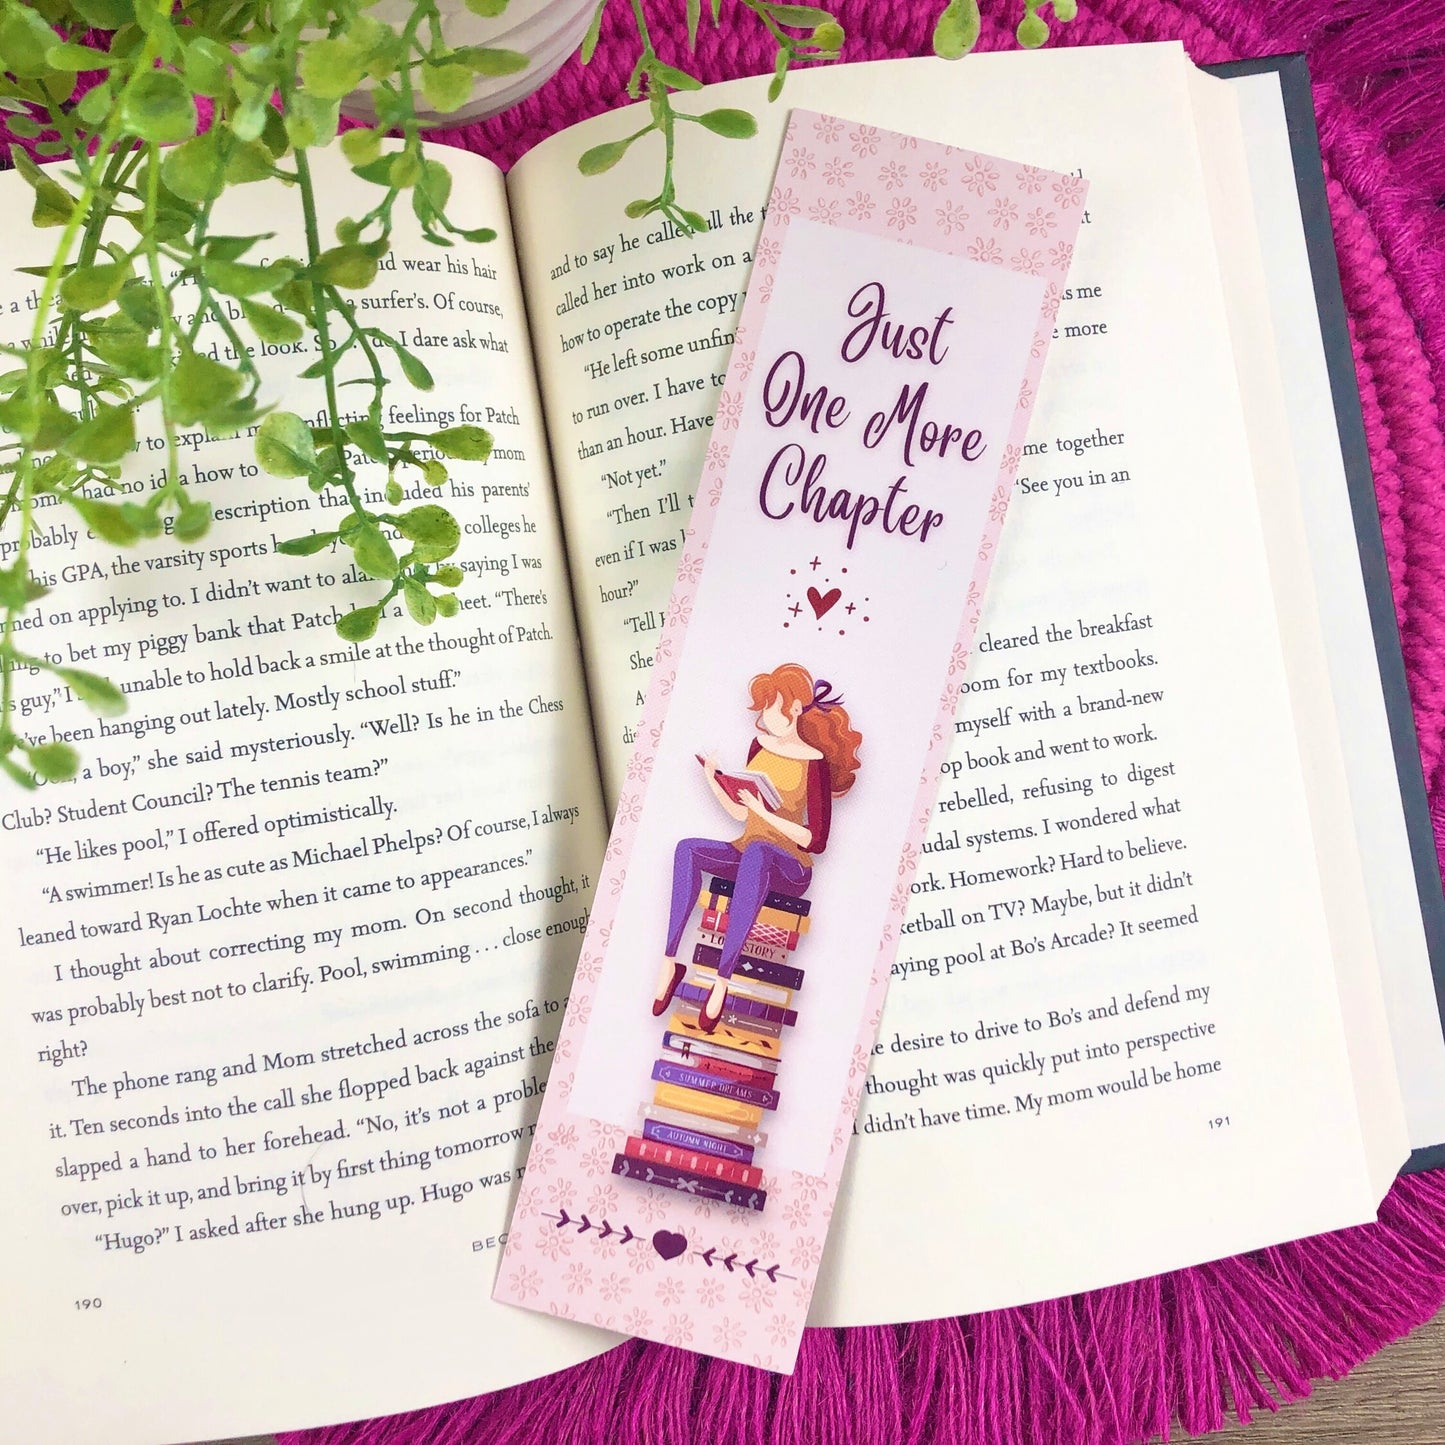 FREE BOOKMARKS!